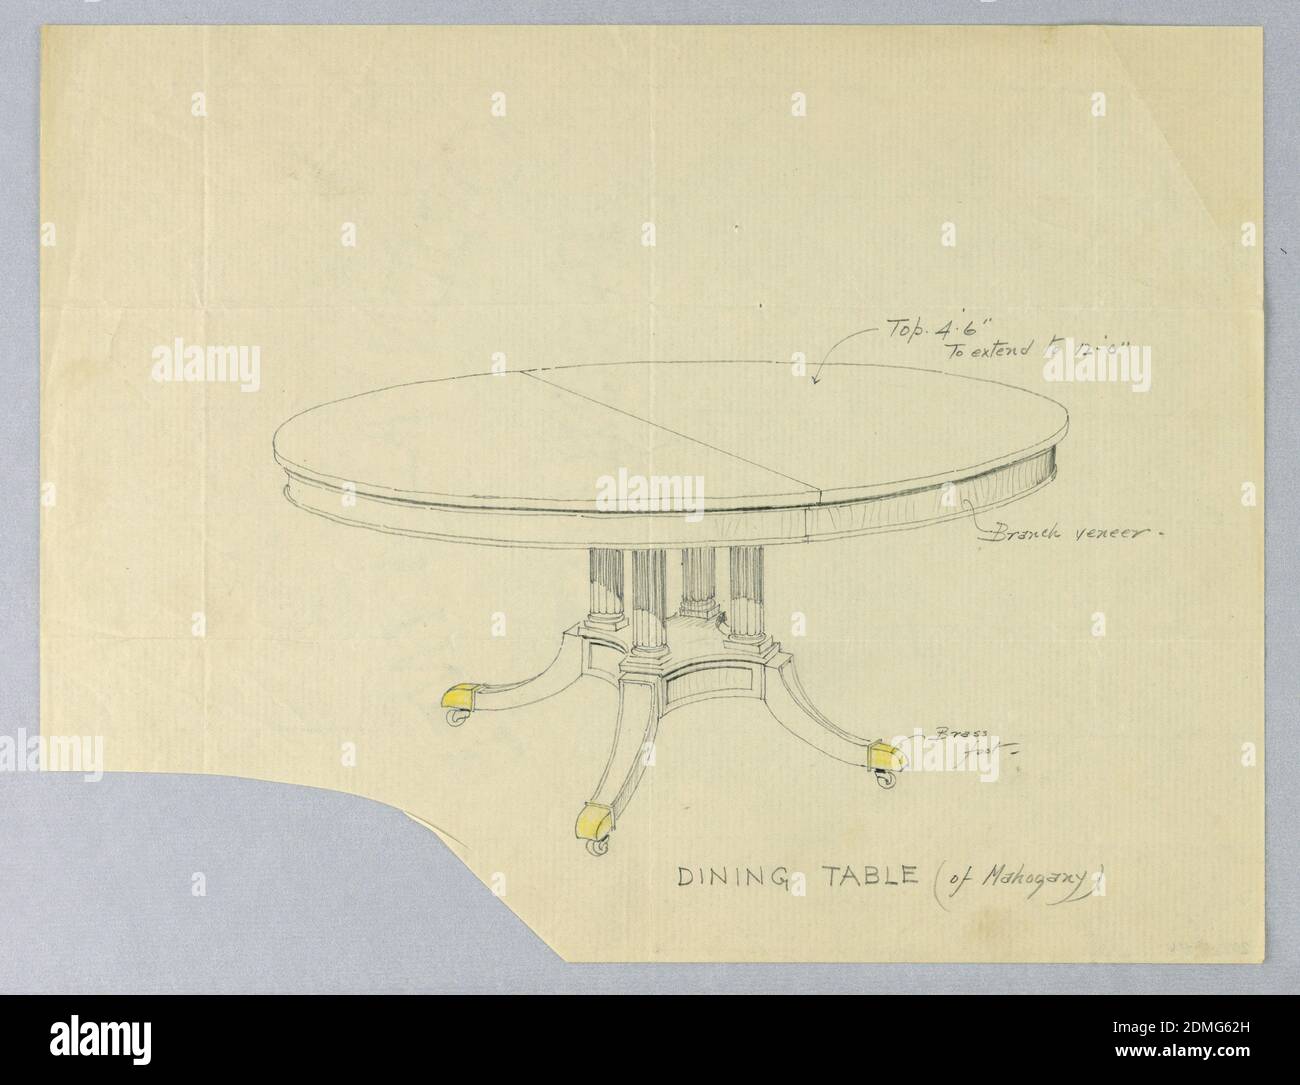 Design for Dining Table of Mahogany on Column-Like Supports, A.N. Davenport  Co., Graphite and yellow color pencil on thin, cream paper, Round molded  top with a dividing stretcher at center is raised